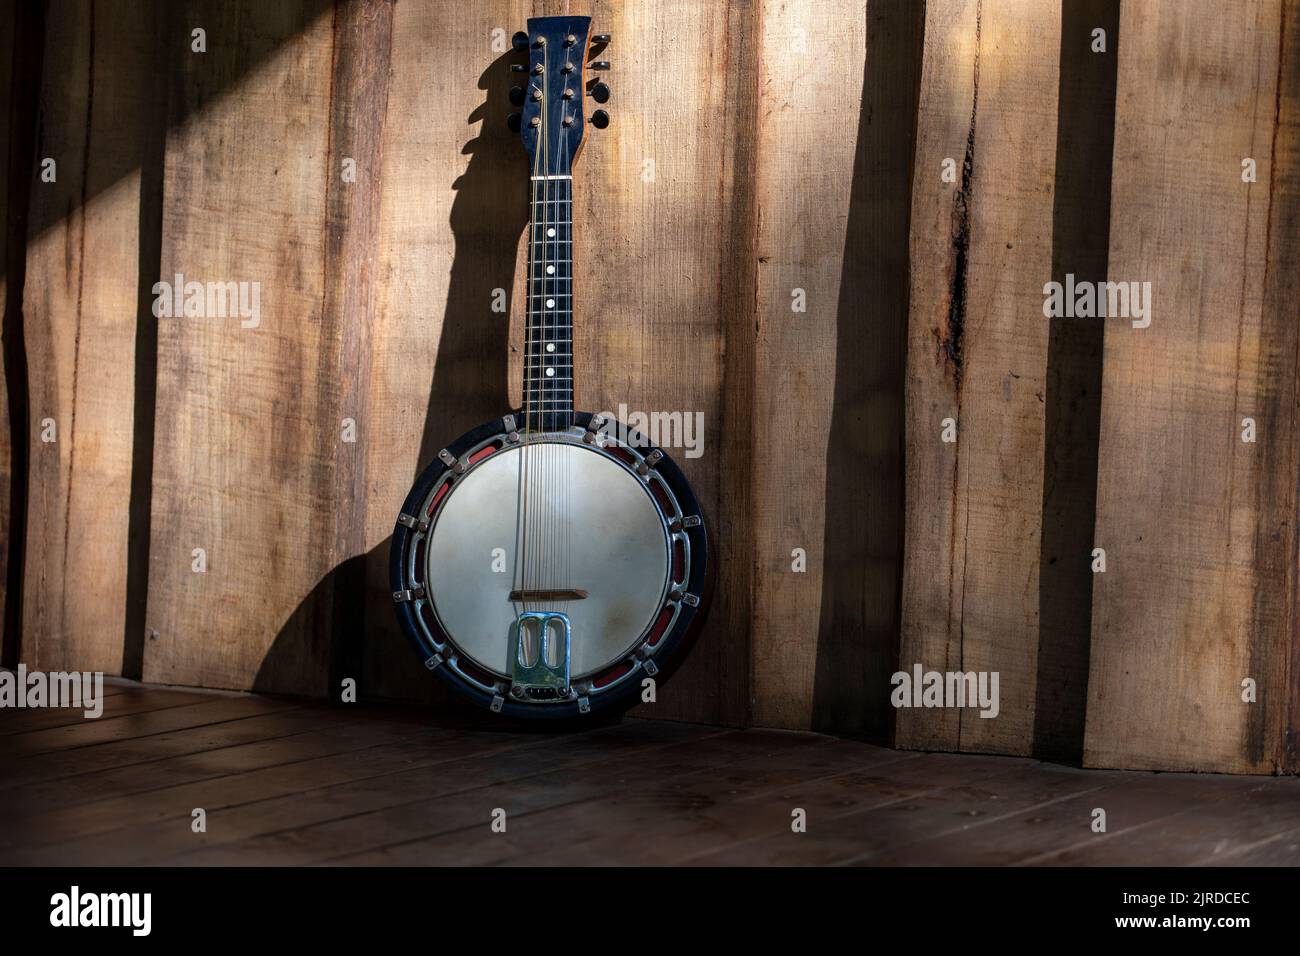 Banjo mandolin leaning against raw vertical wooden cladding, with Copy space. Stock Photo